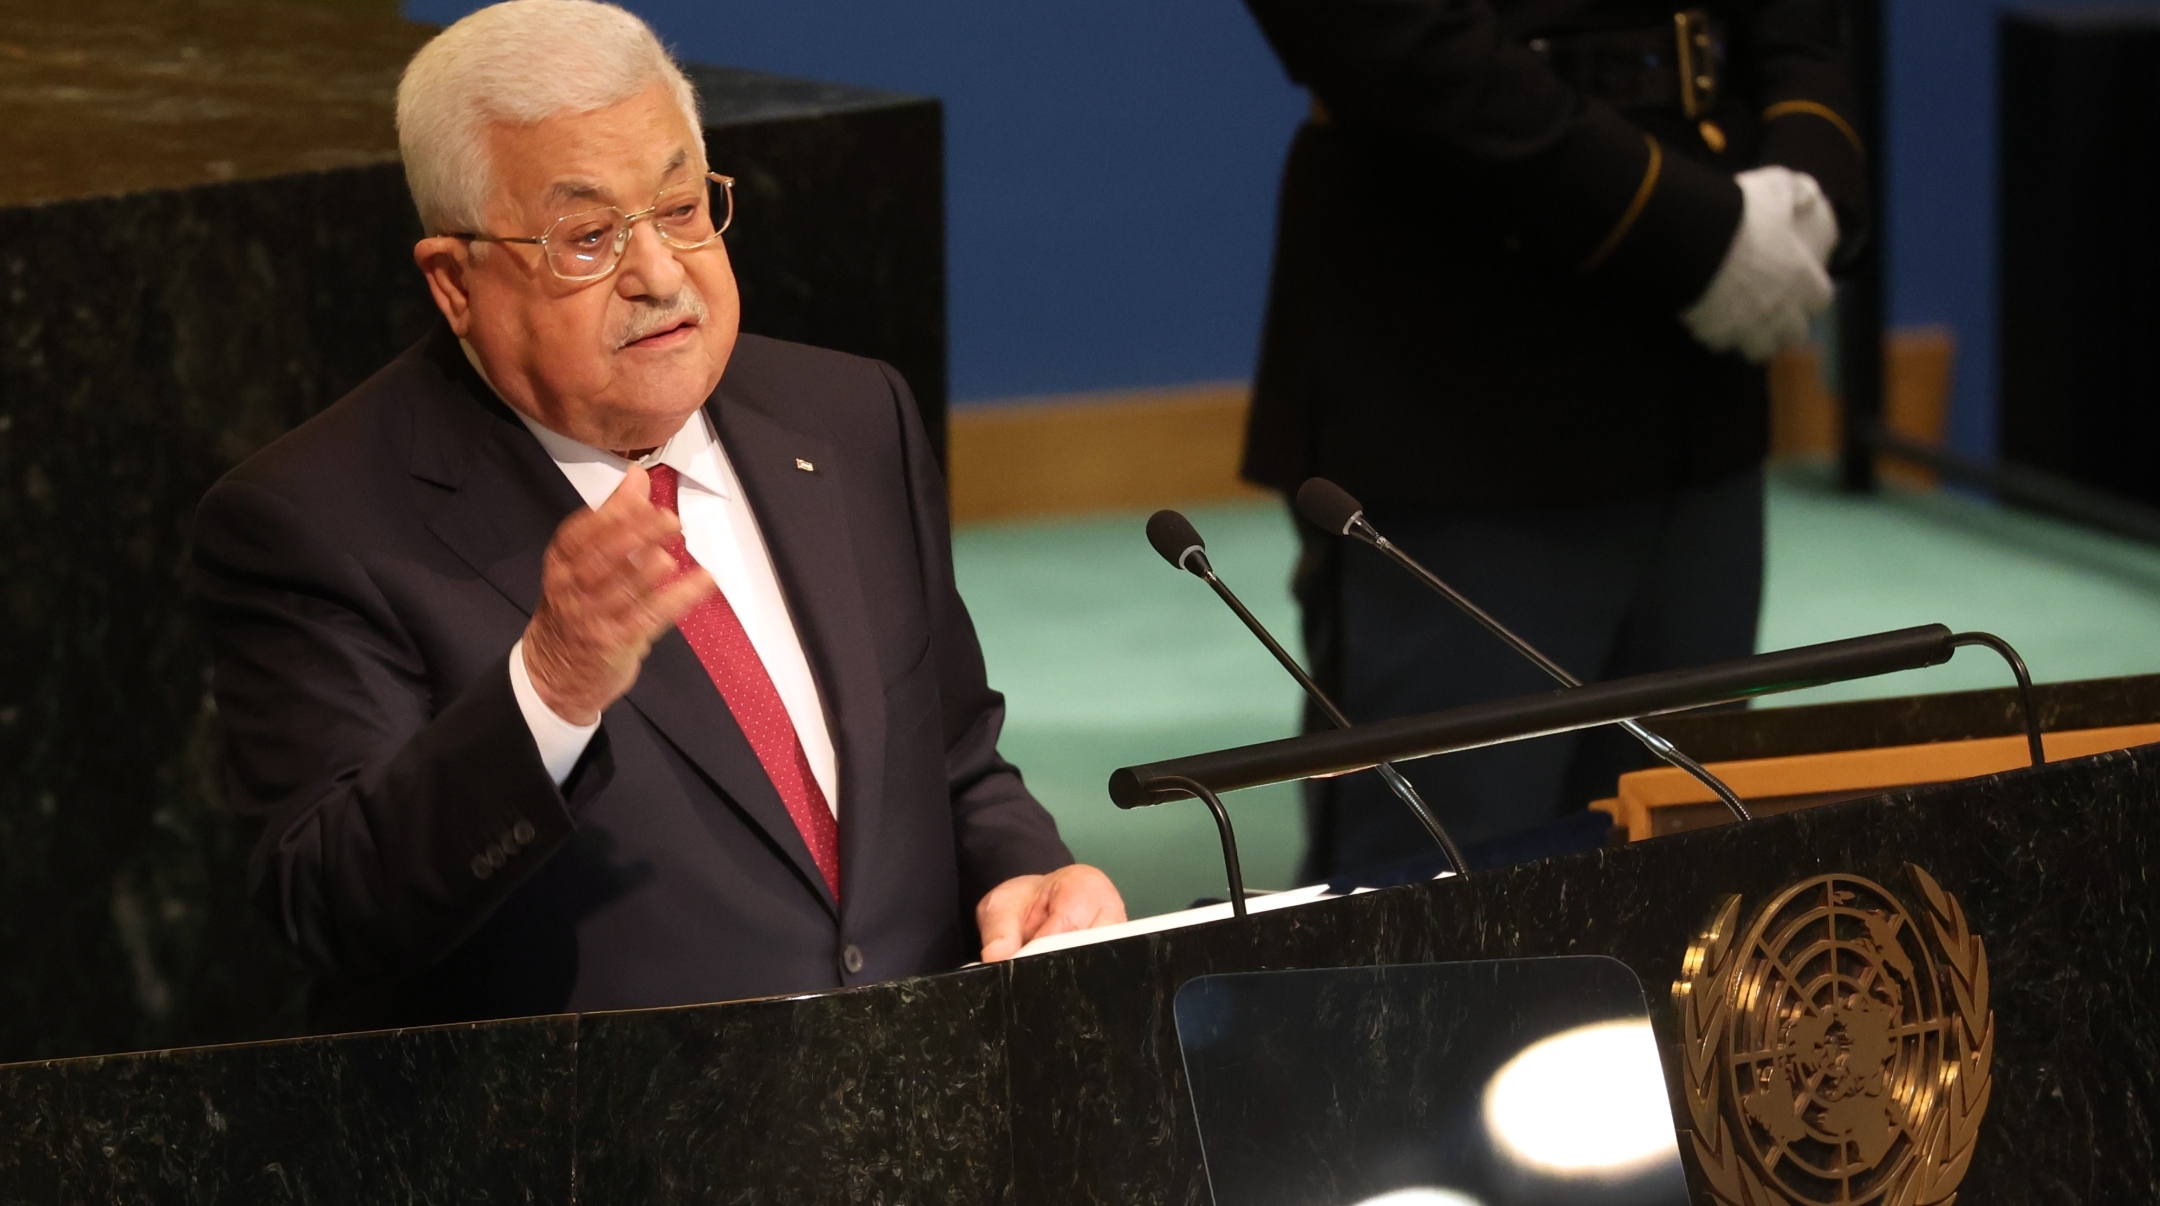 Palestinian president Mahmoud Abbas speaks at the 77th session of the United Nations General Assembly at U.N. headquarters in New York City, Sept. 23, 2022. (Spencer Platt/Getty Images)